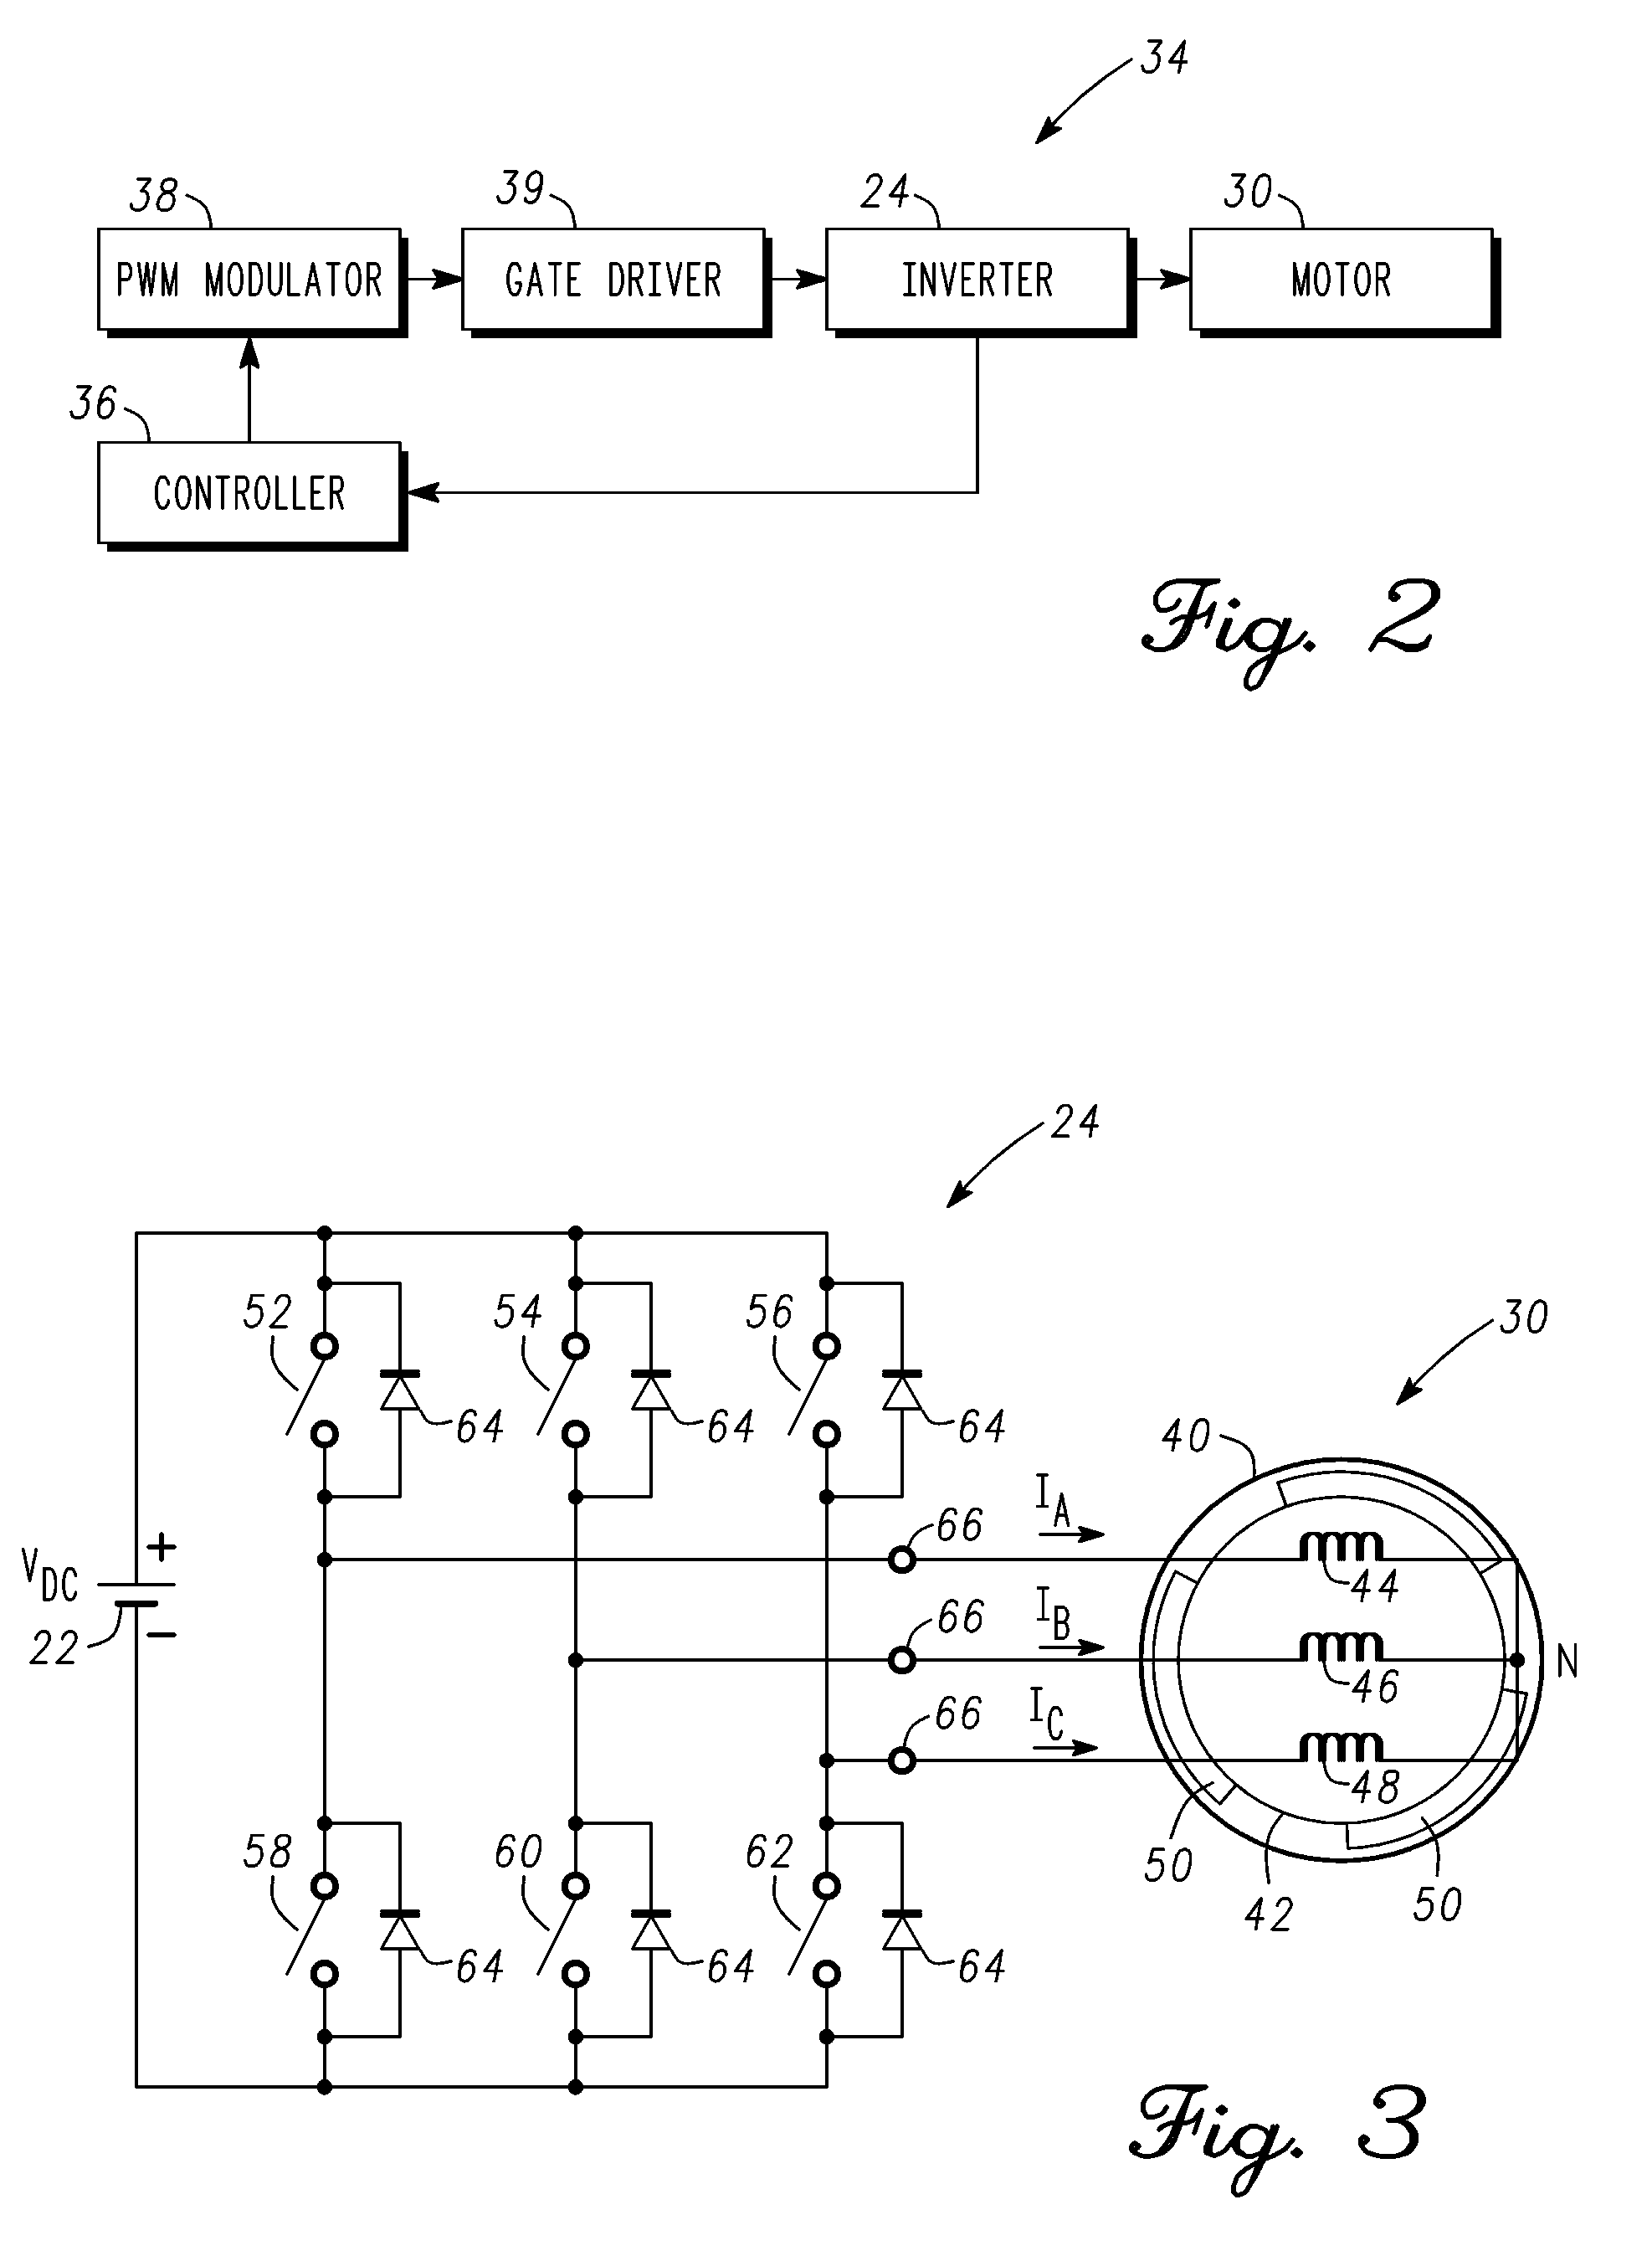 Method and system for testing electric automotive drive systems